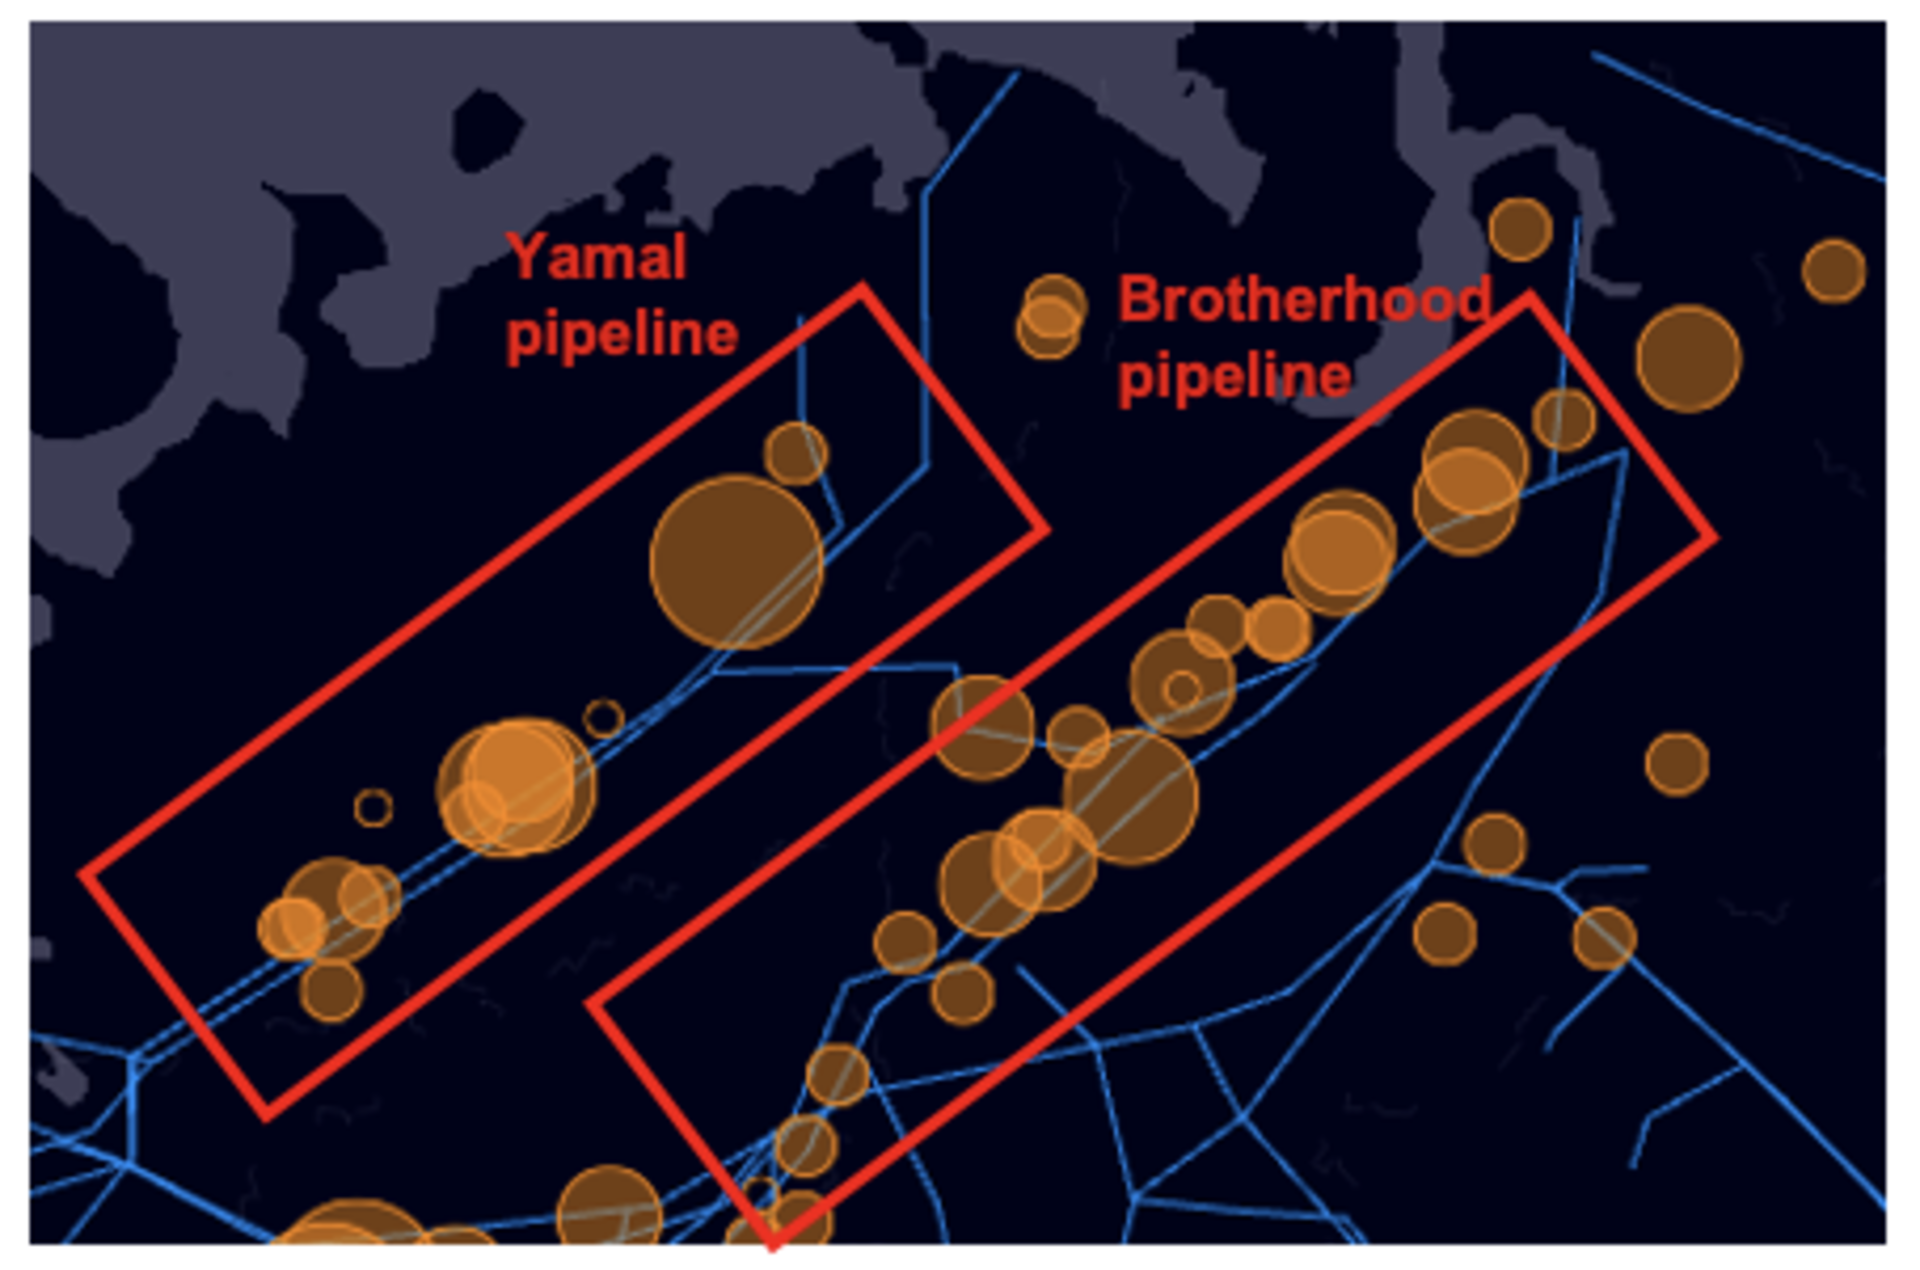 Emission hotspots from the Yamal-Europe and ‘Brotherhood’ pipelines